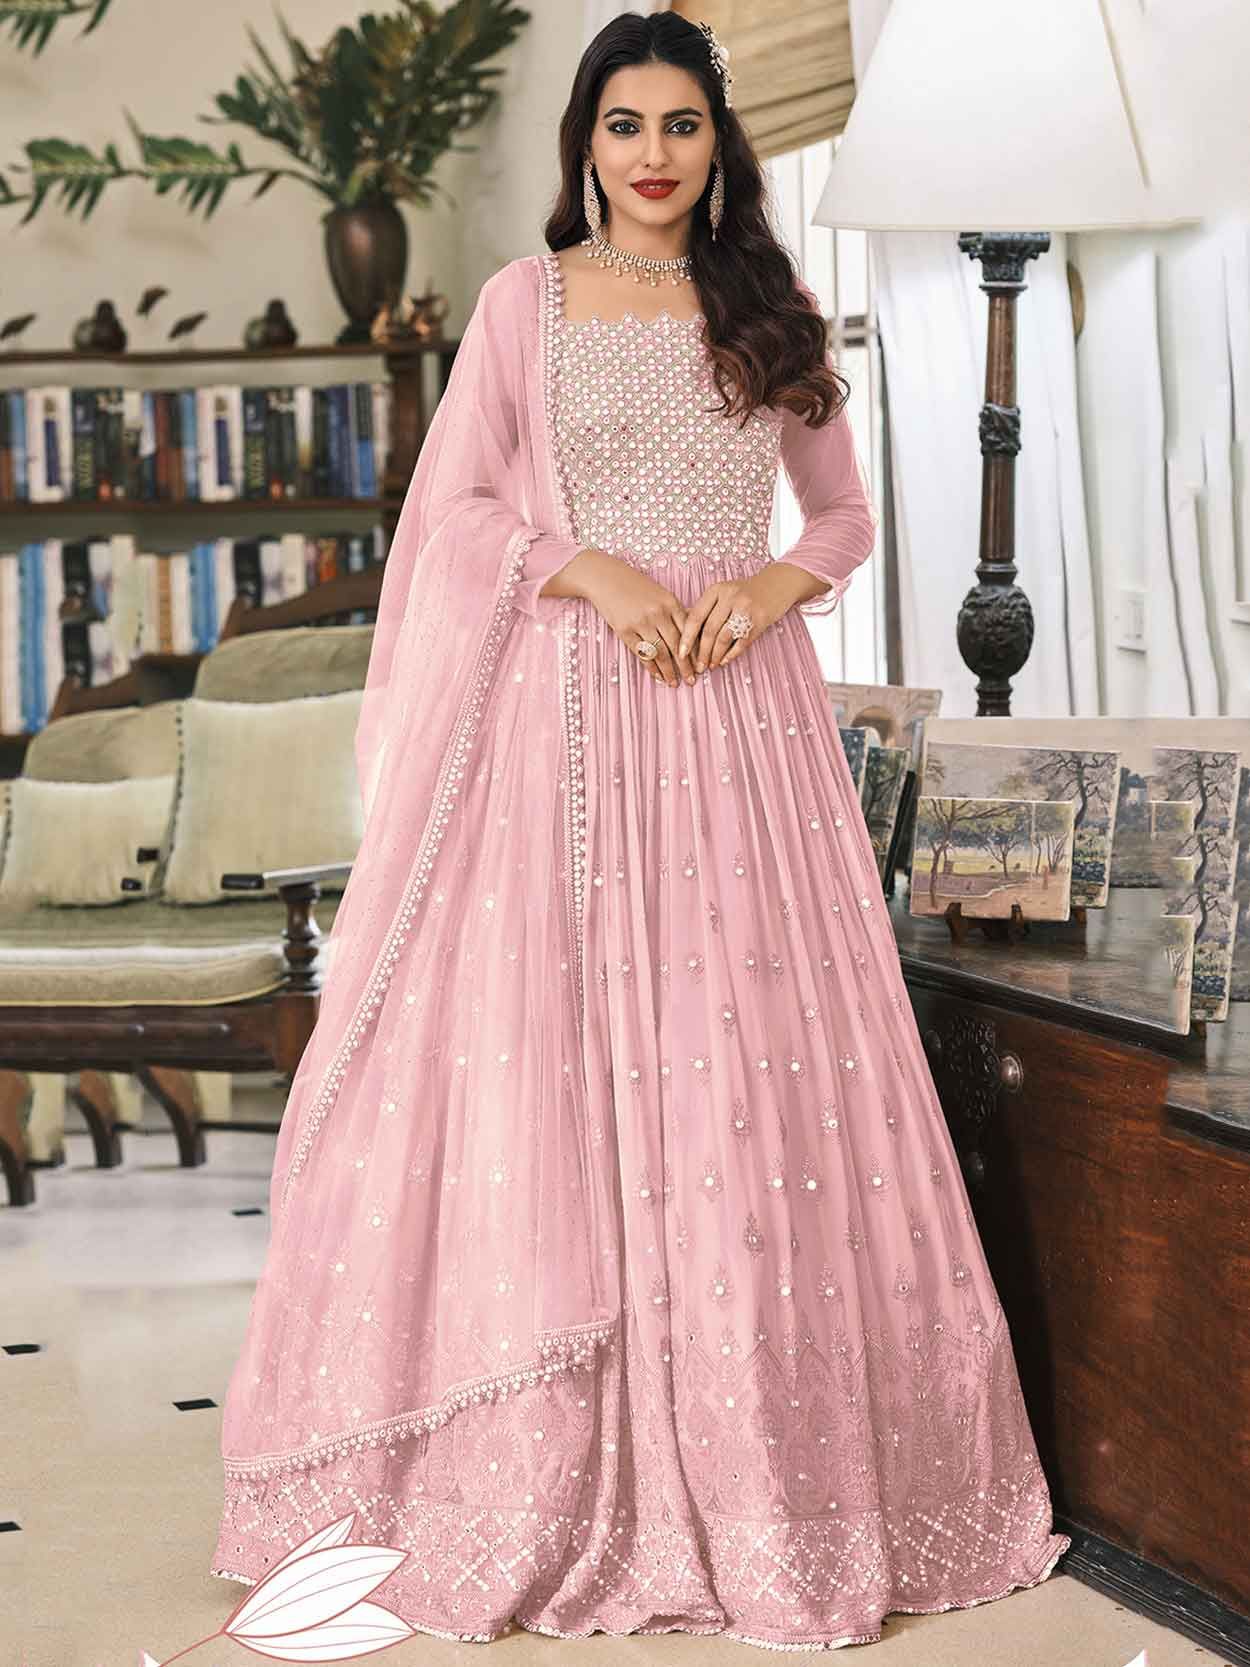 Dola Silk Embroidery Anarkali Suit In Pink Colour - SM5630088